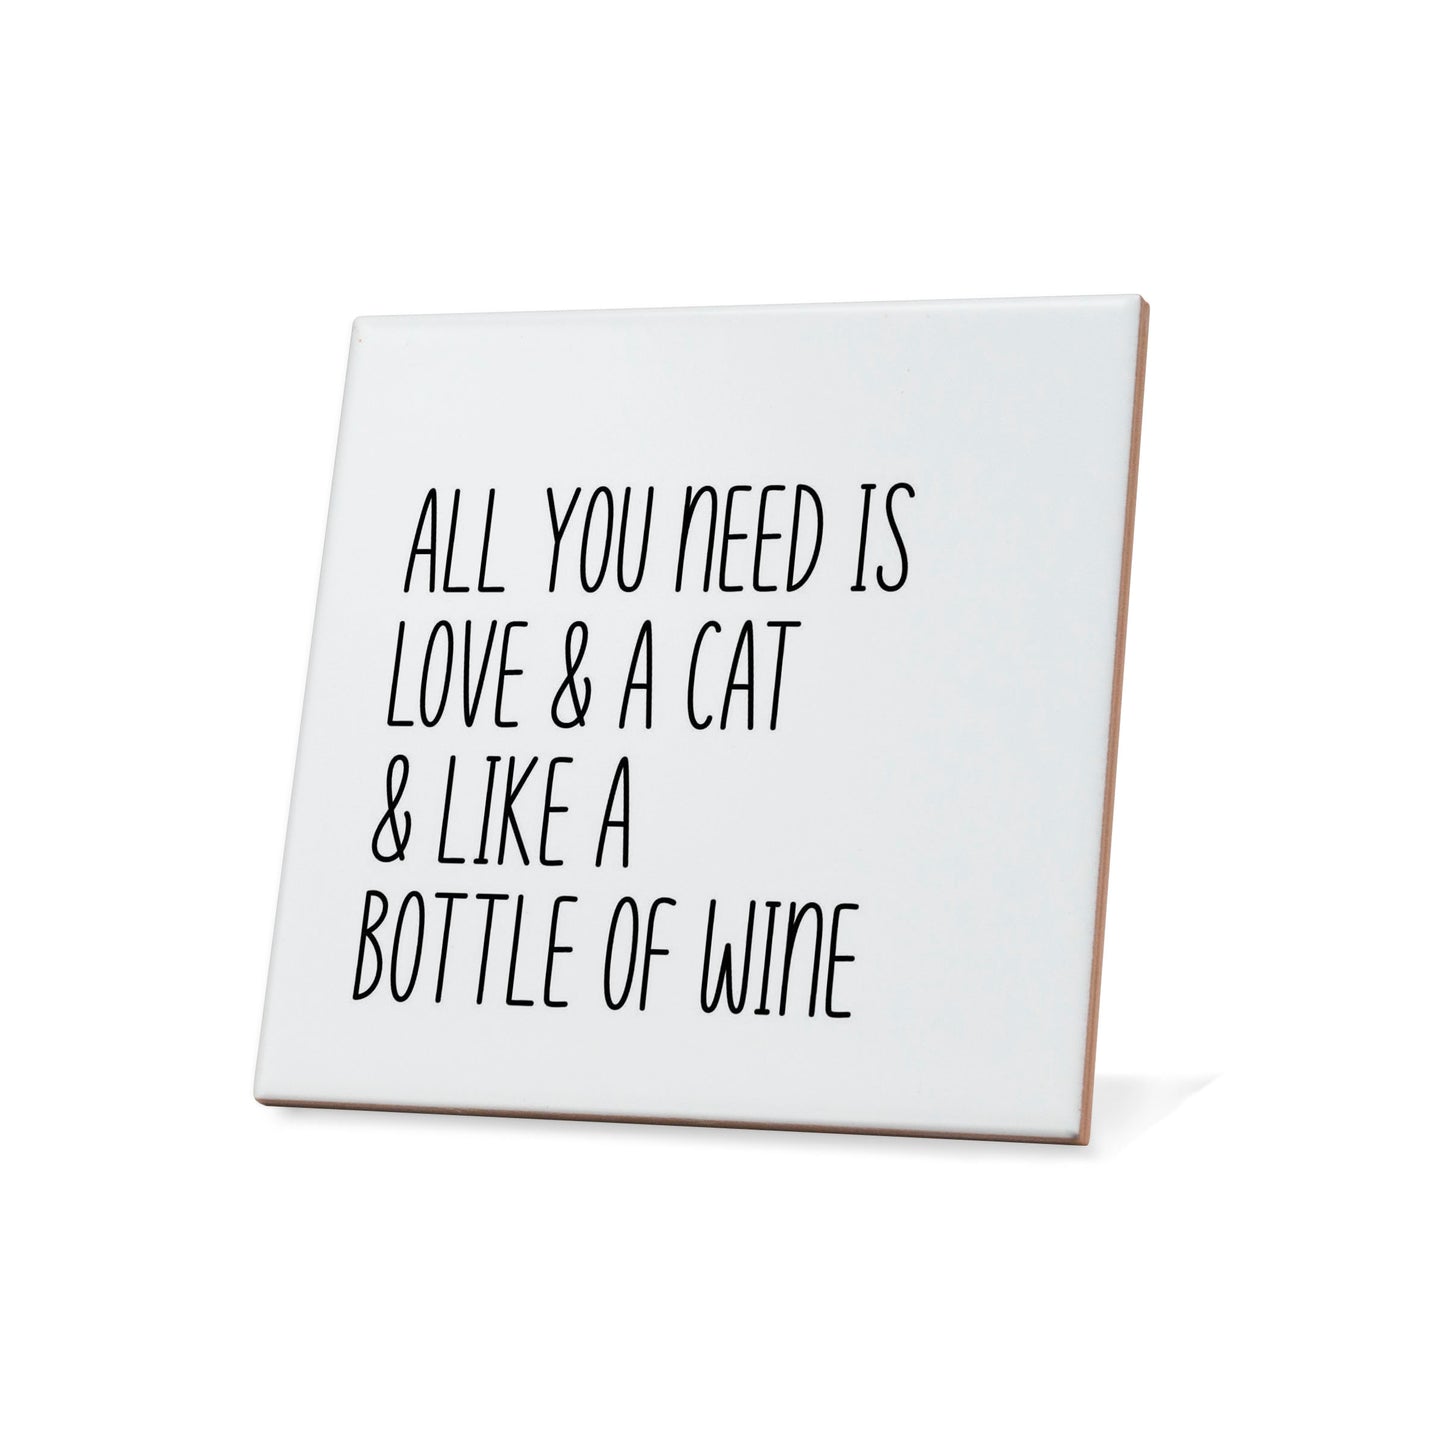 All you need is love & a cat & Wine Quote Coaster